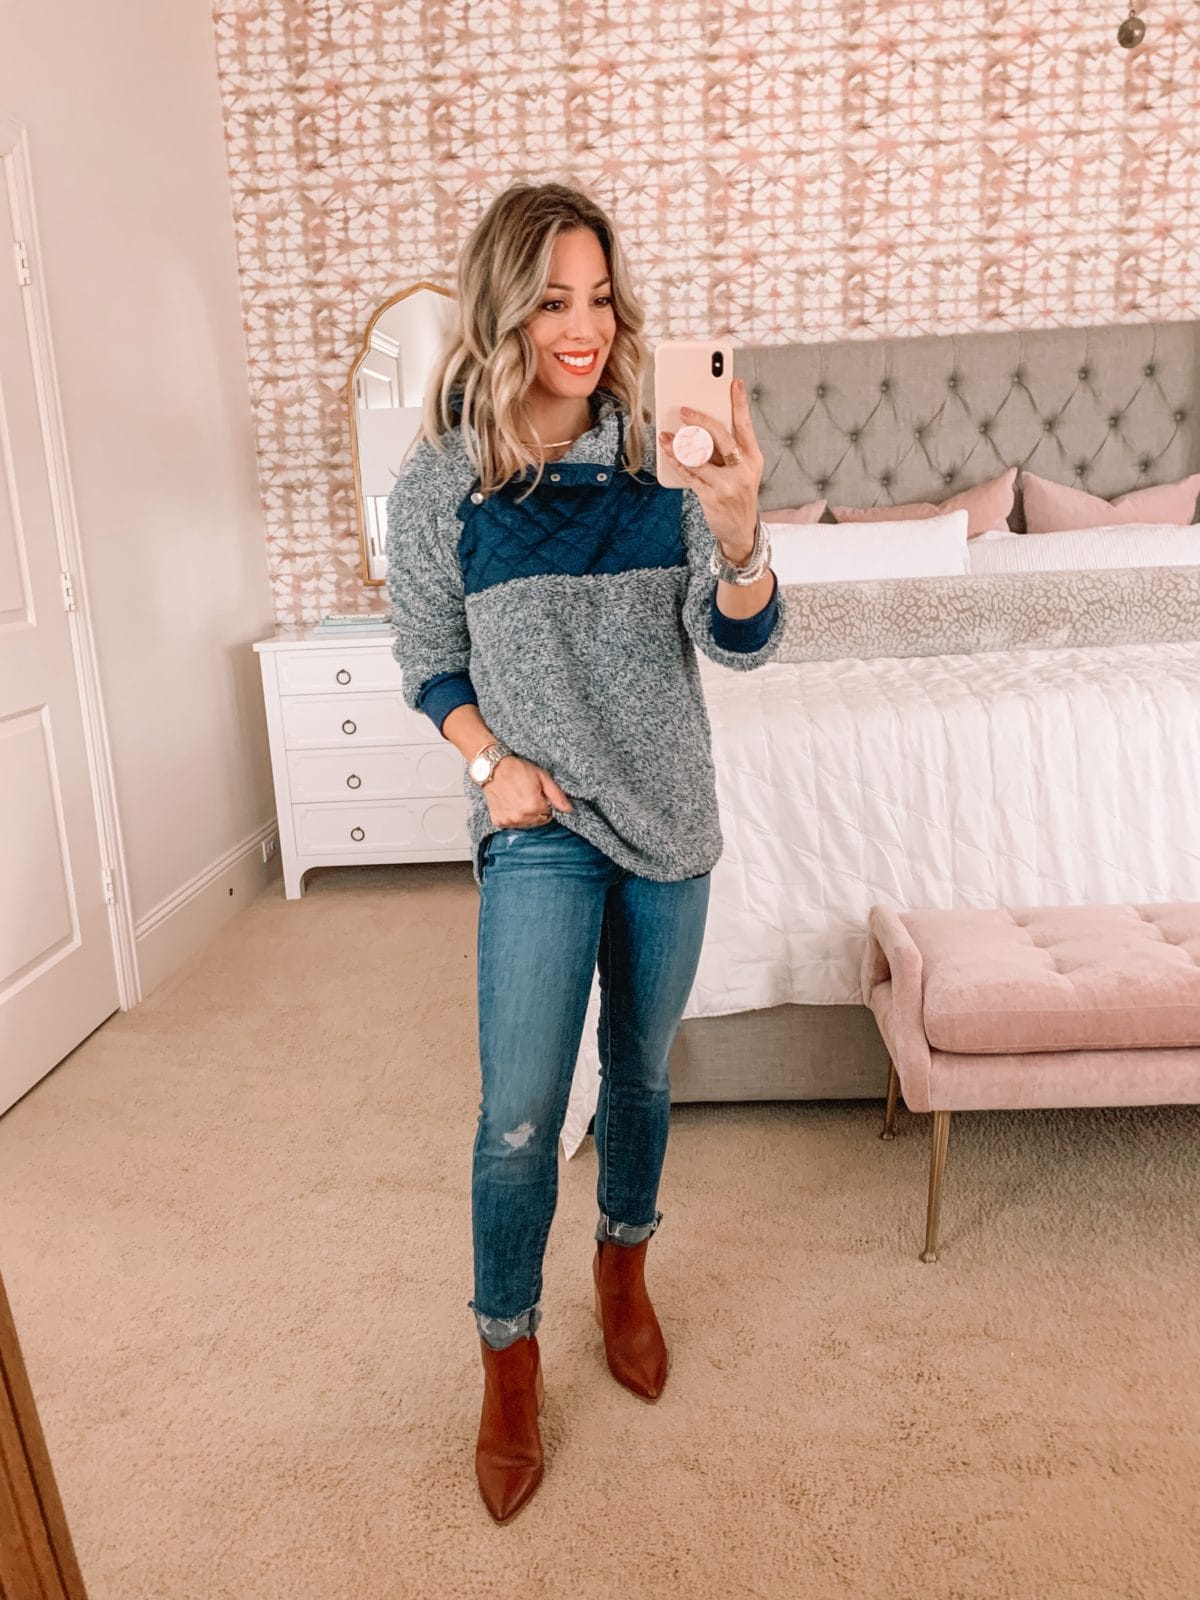 Amazon Fashion Faves, pullover, jeans, booties 